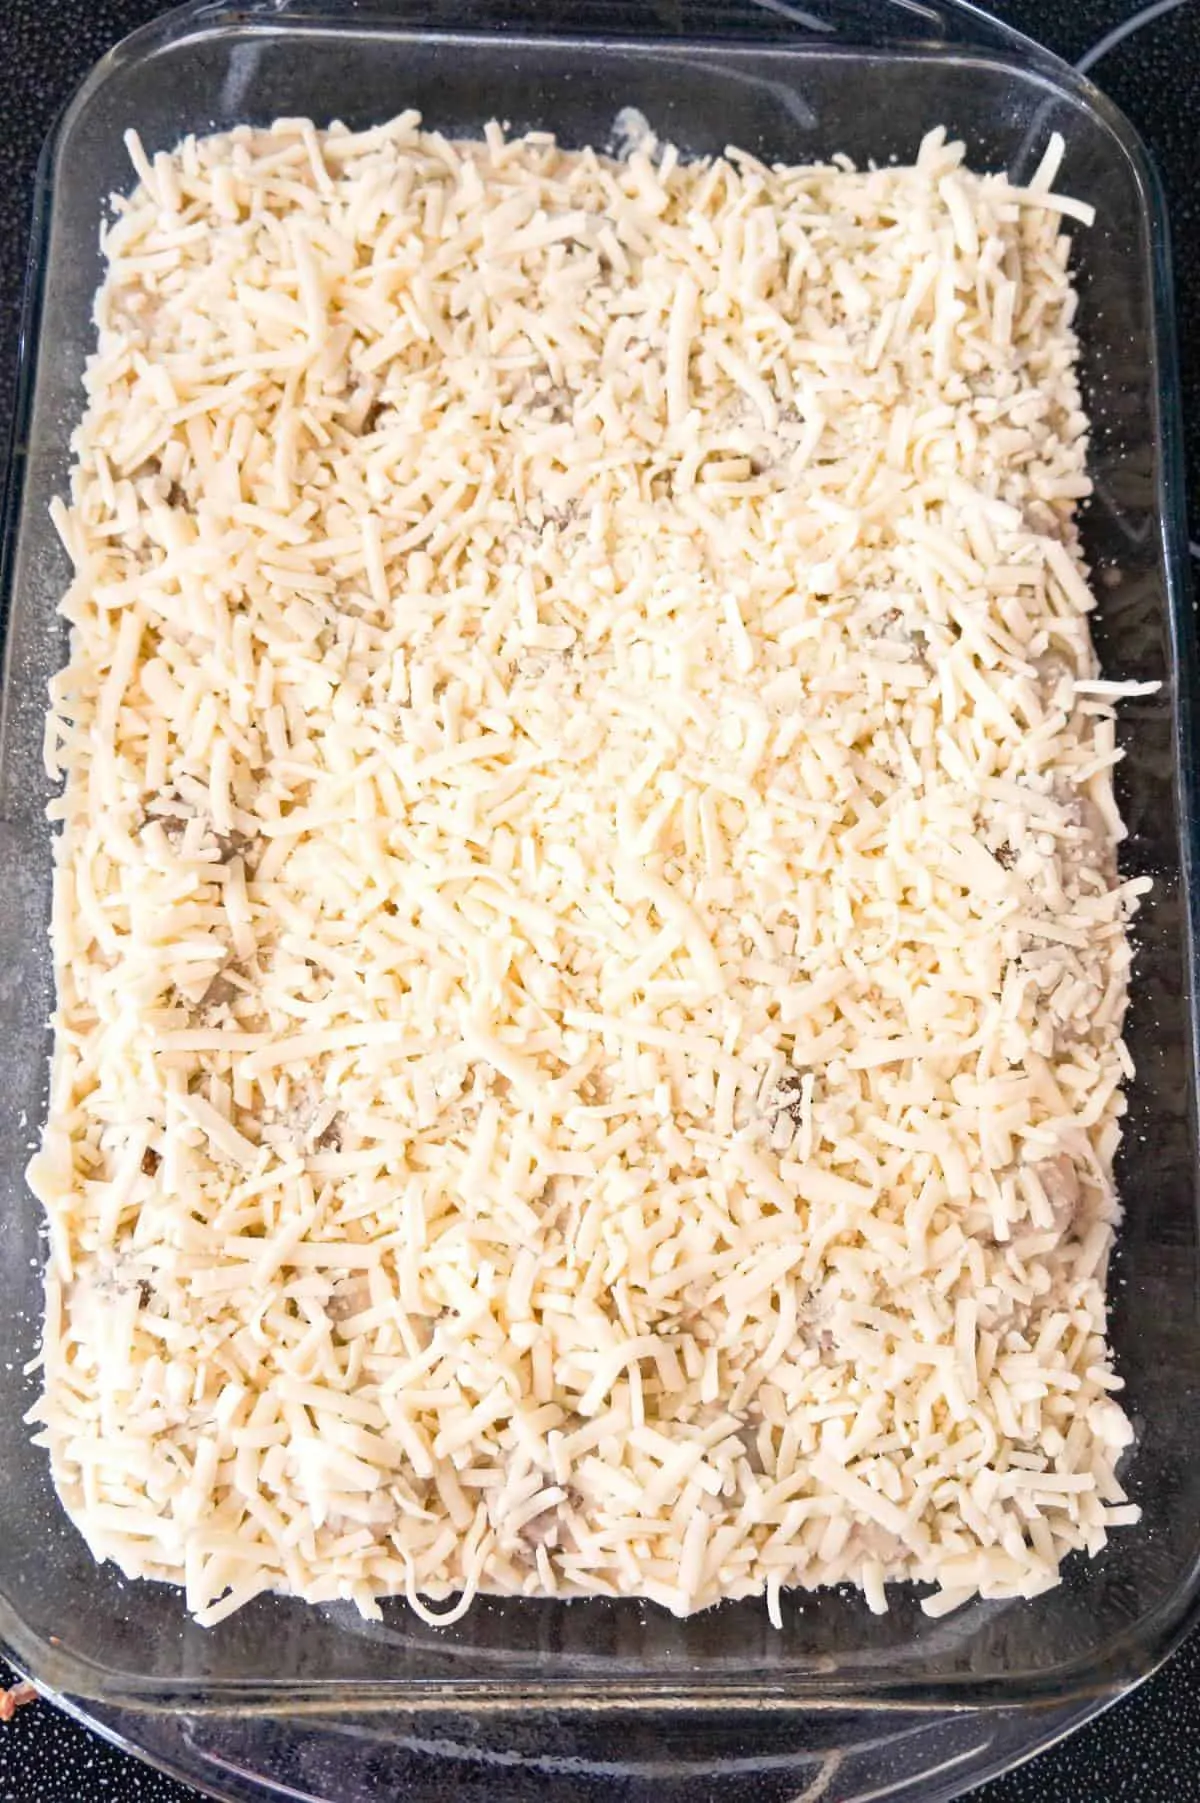 shredded mozzarella cheese on top of Swedish meatballs in a baking dish